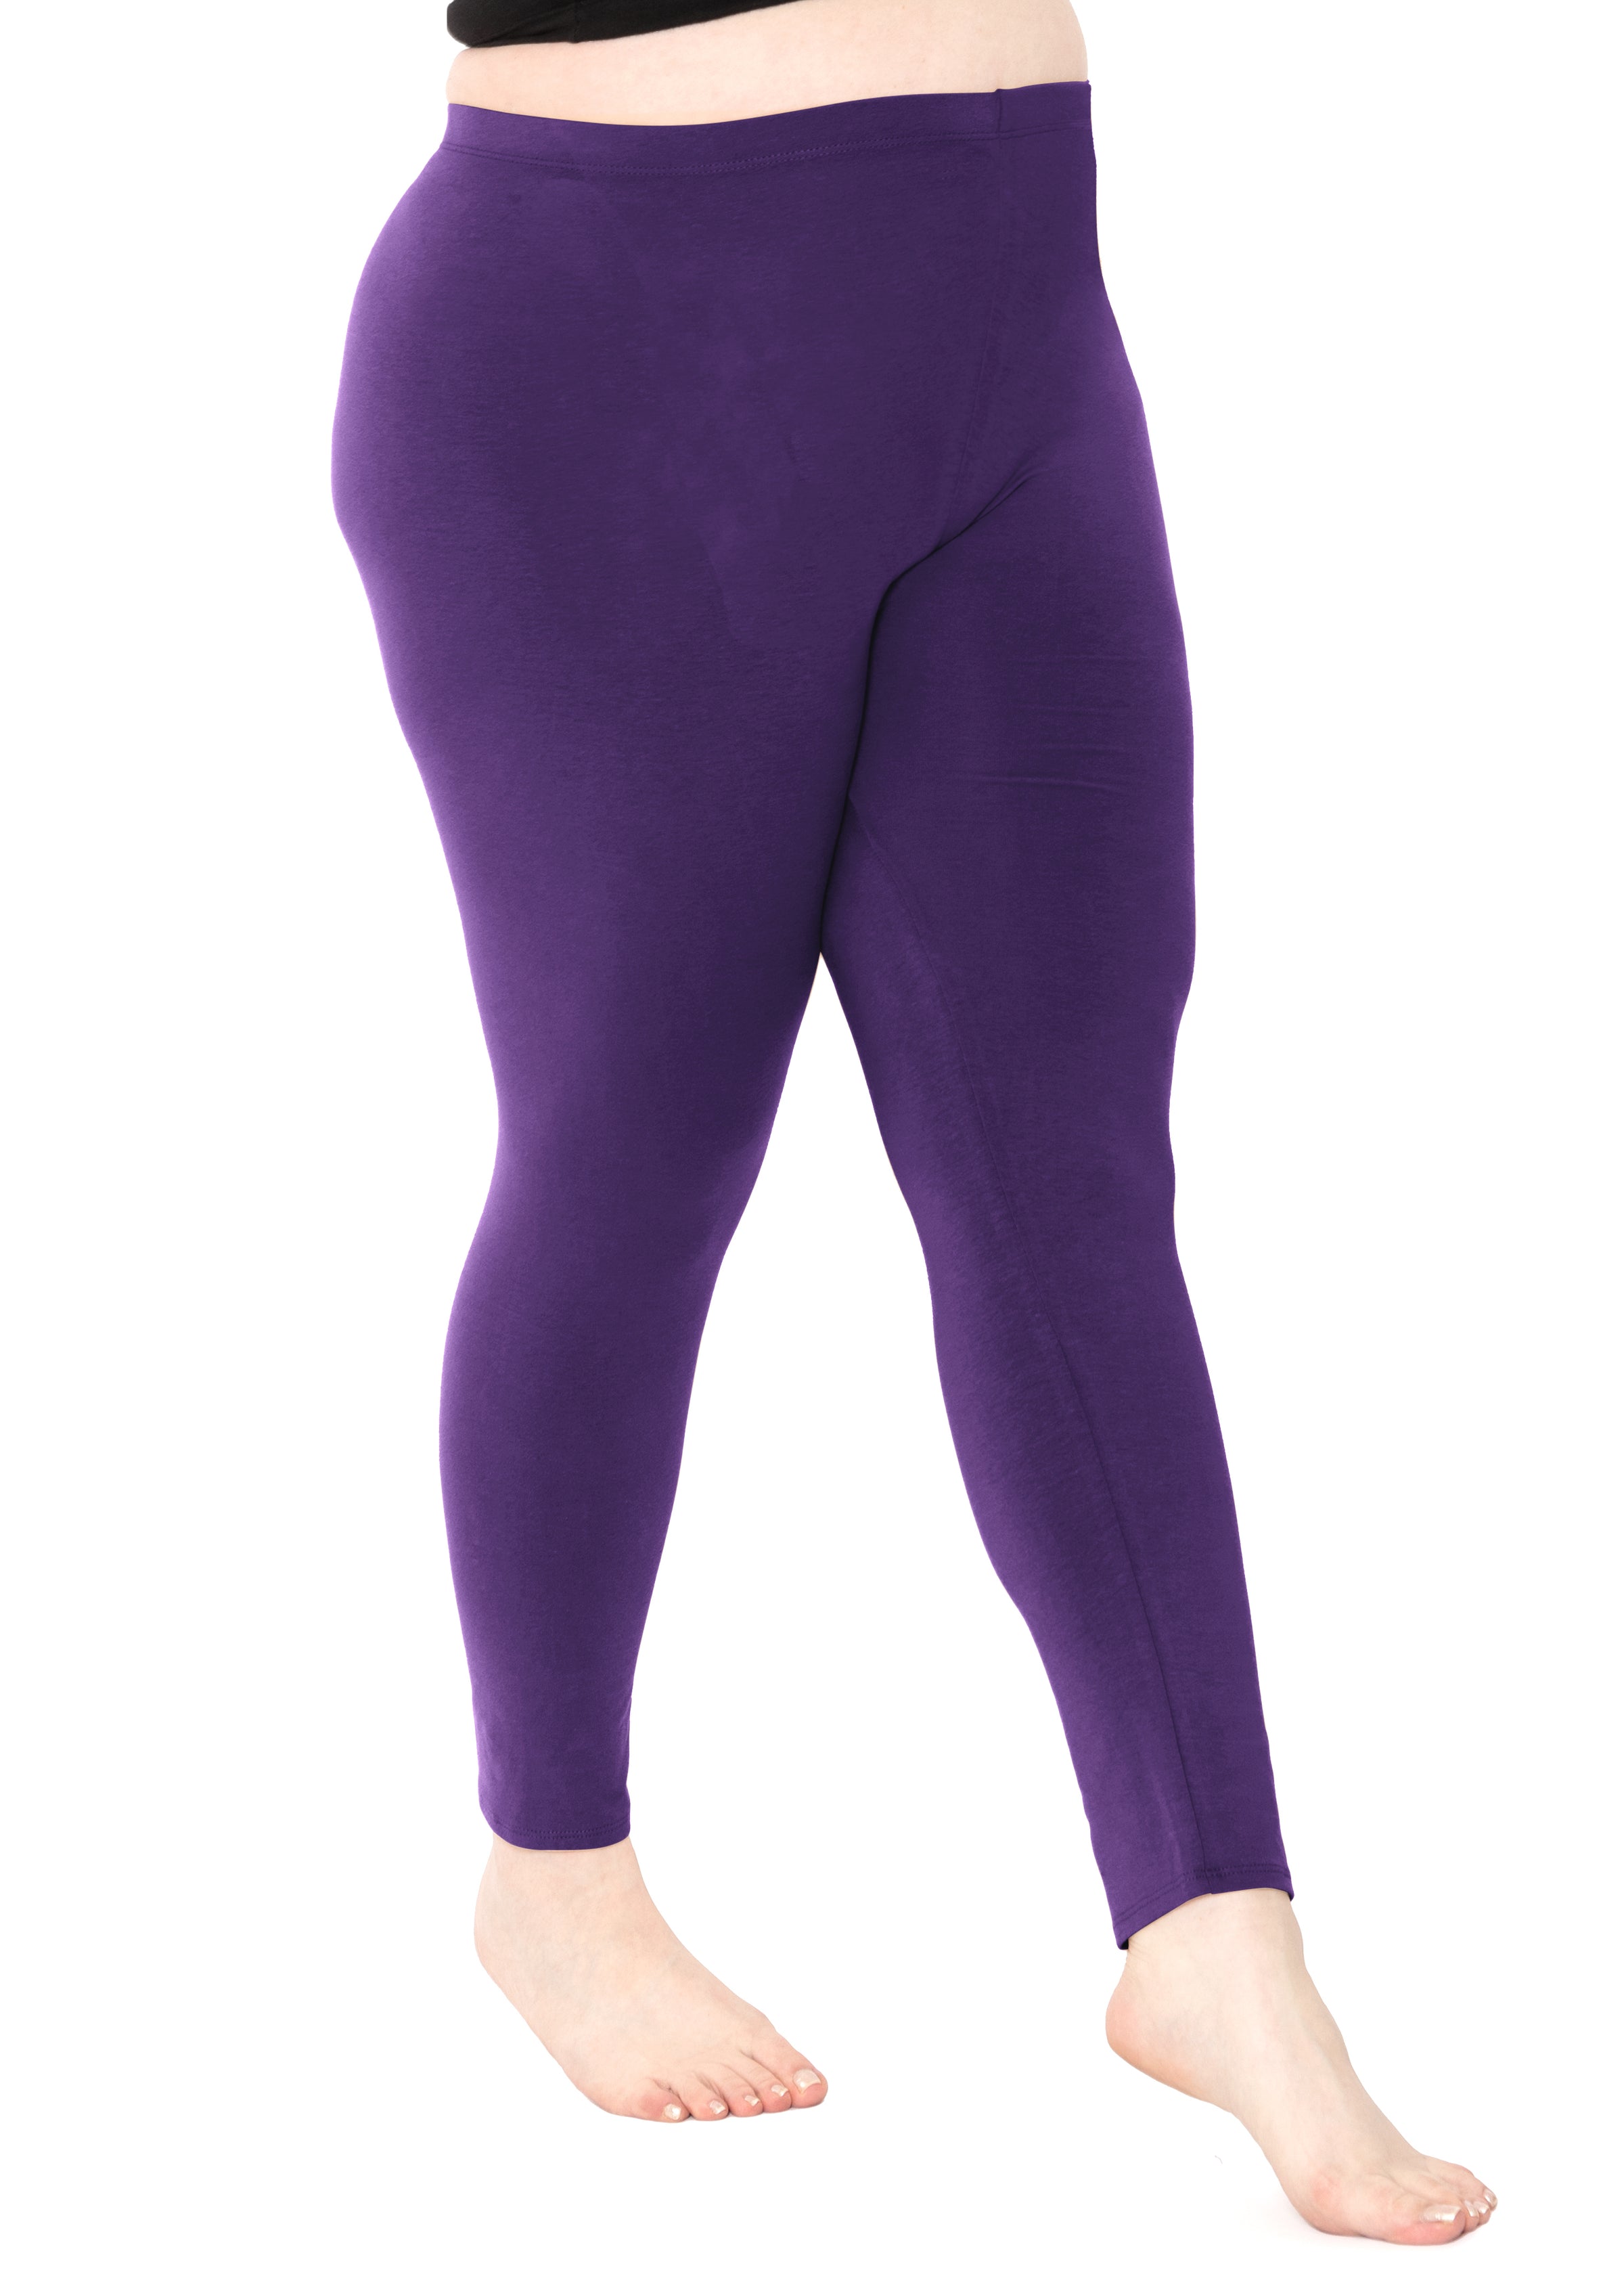 FANCY WOMENS COMFORTABLE PURPLE RONDE COTTON LEGGINGS ONE SIZE FITS ALL